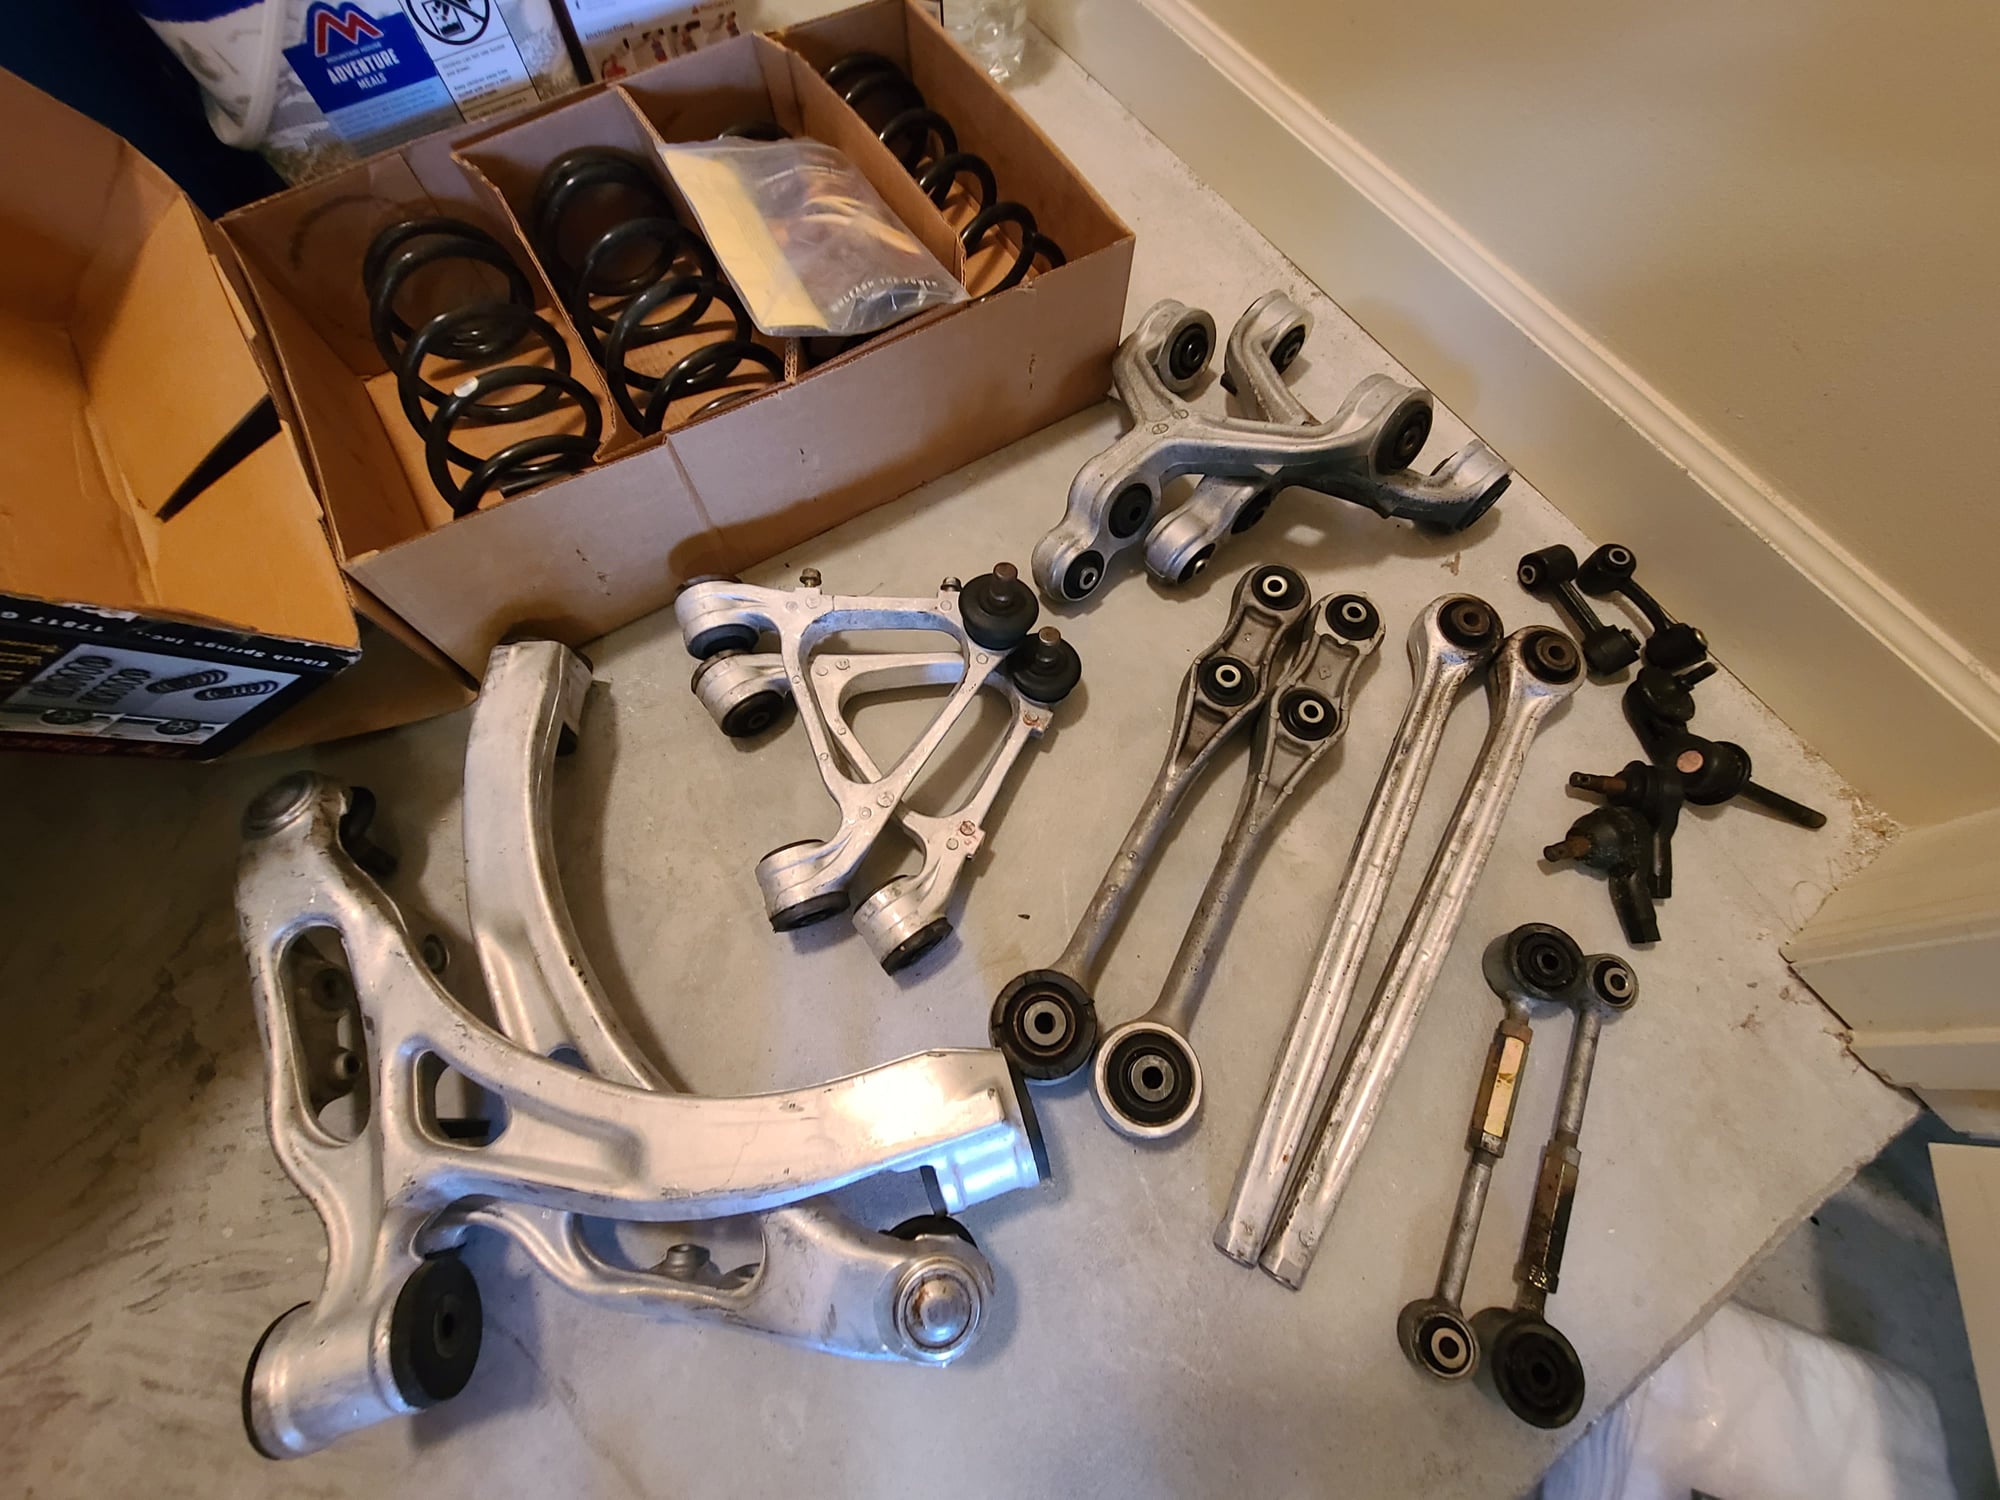 Steering/Suspension - FD OEM Suspension ($300obo + shipping) - Used - 1993 to 1995 Mazda RX-7 - Niceville, FL 32578, United States